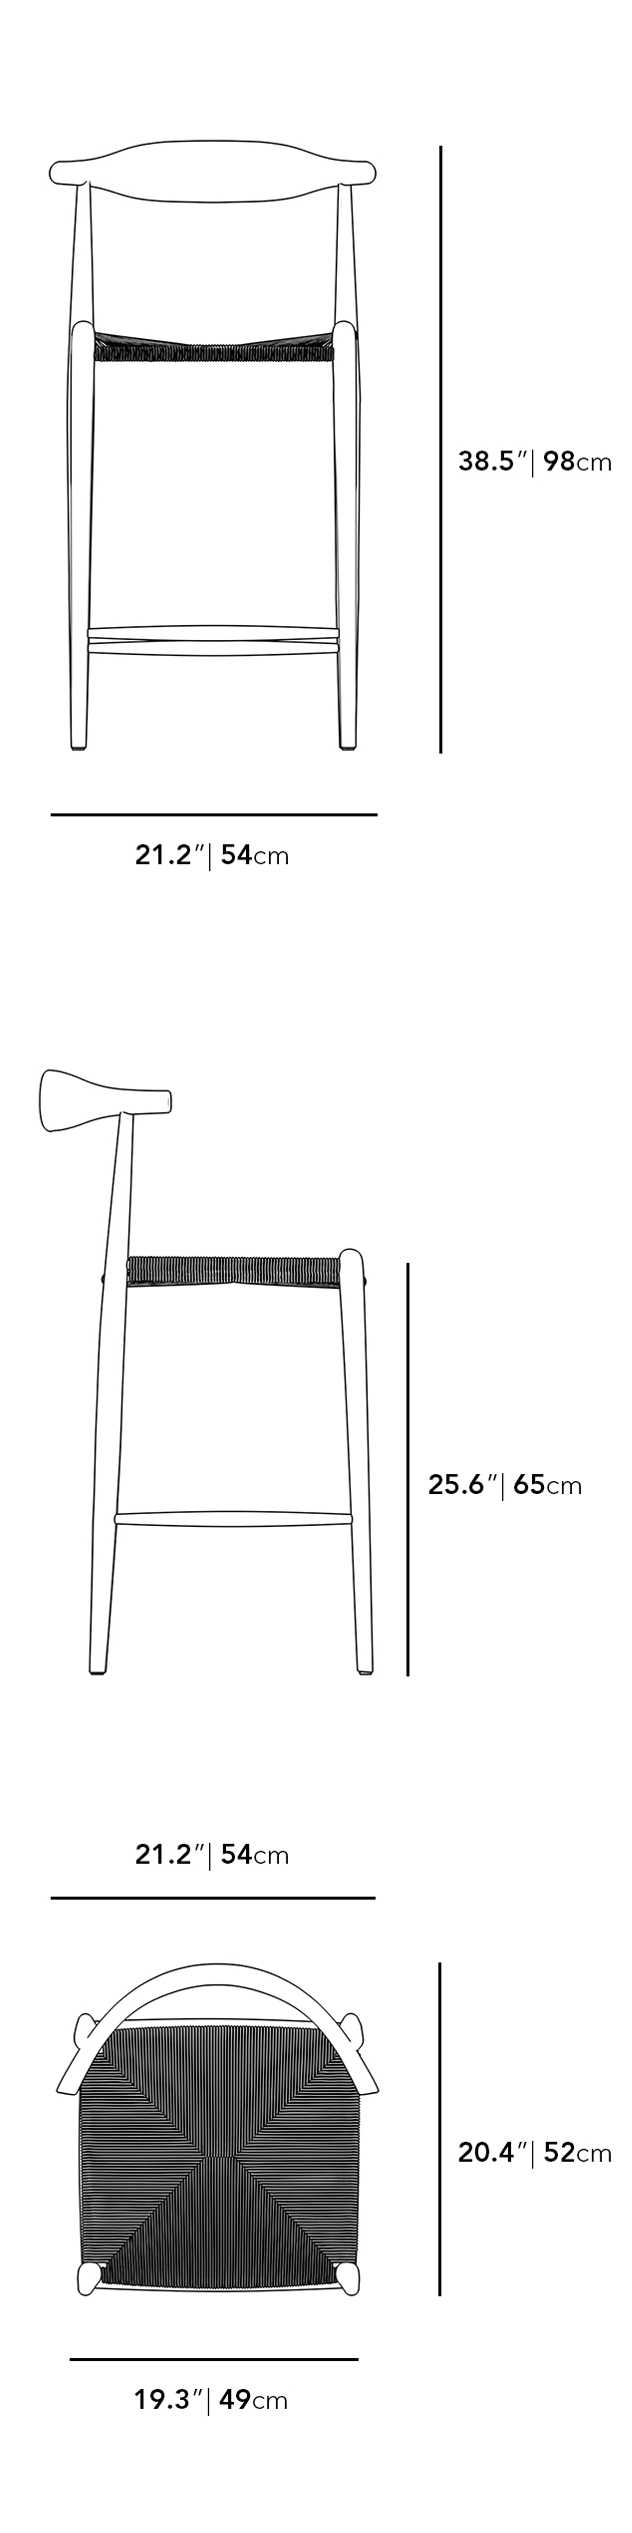 Dimensions for Elbow Counter Stool - Woven